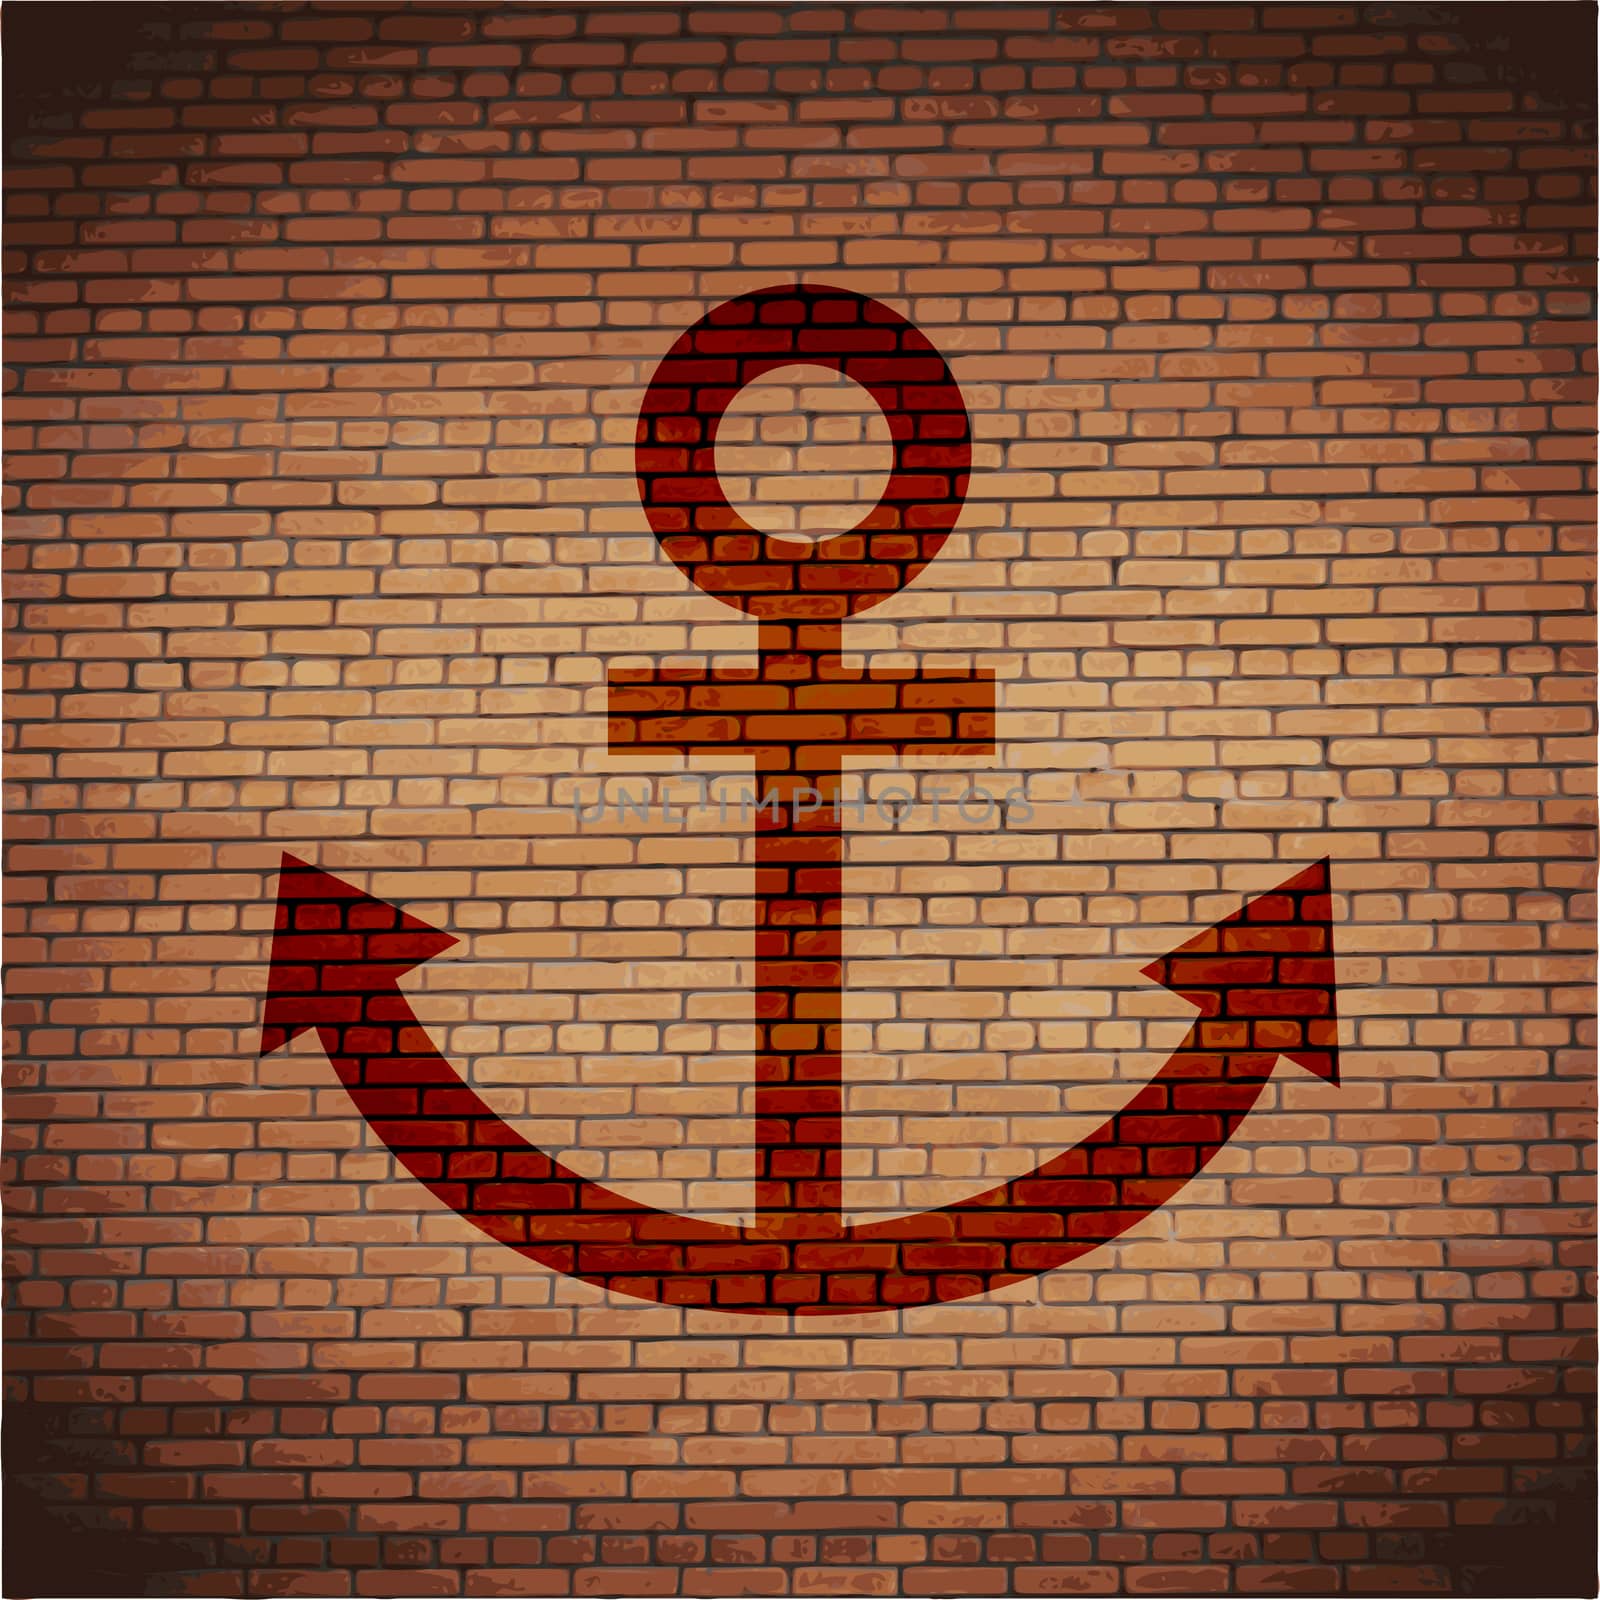 Anchor icon flat design with abstract background by serhii_lohvyniuk